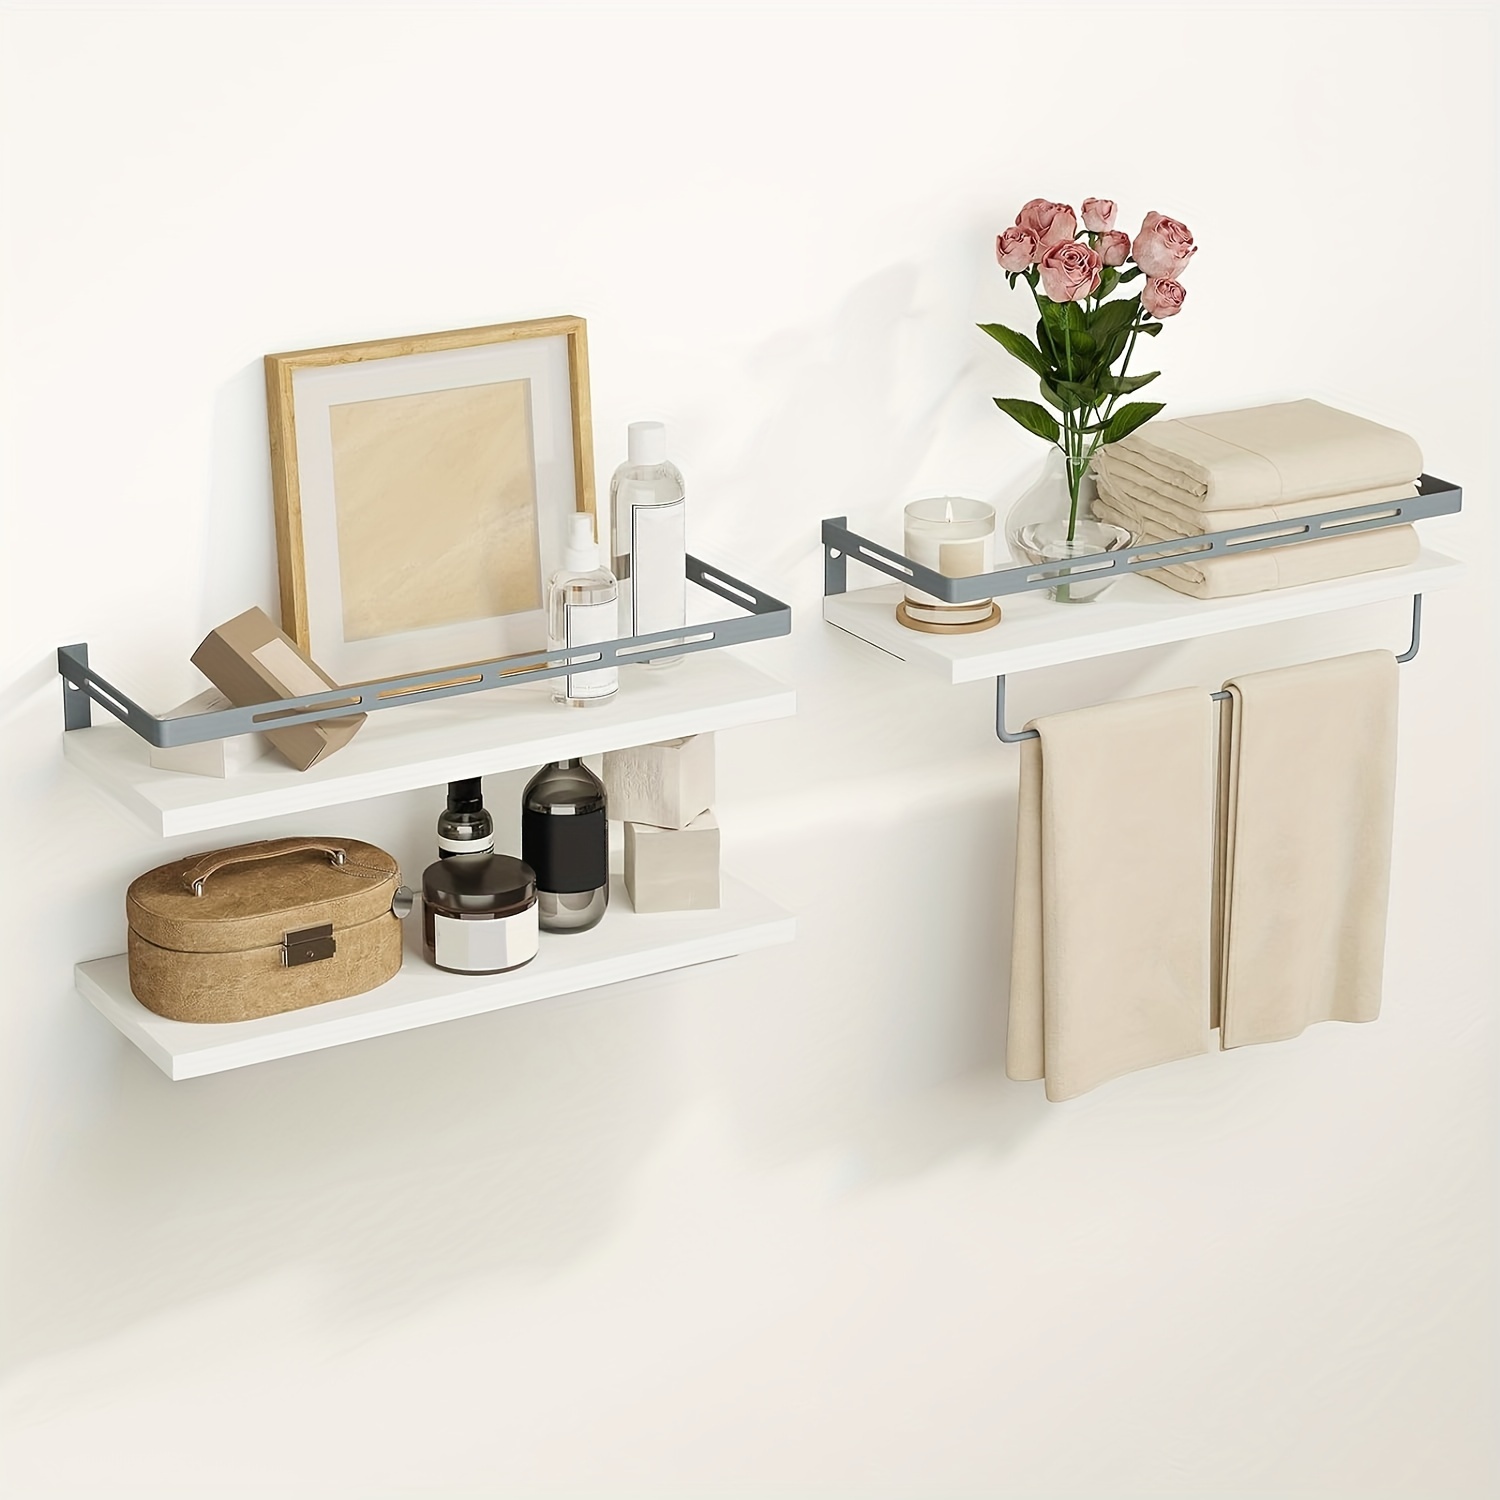 

White And Gray Bracket, 3+1 Tier Bathroom Shelves, Wall Mounted Floating Shelves With Metal Frame, Over Toilet With Wire Storage Basket And Towel Bar For Bathroom, Kitchen, Bedroom